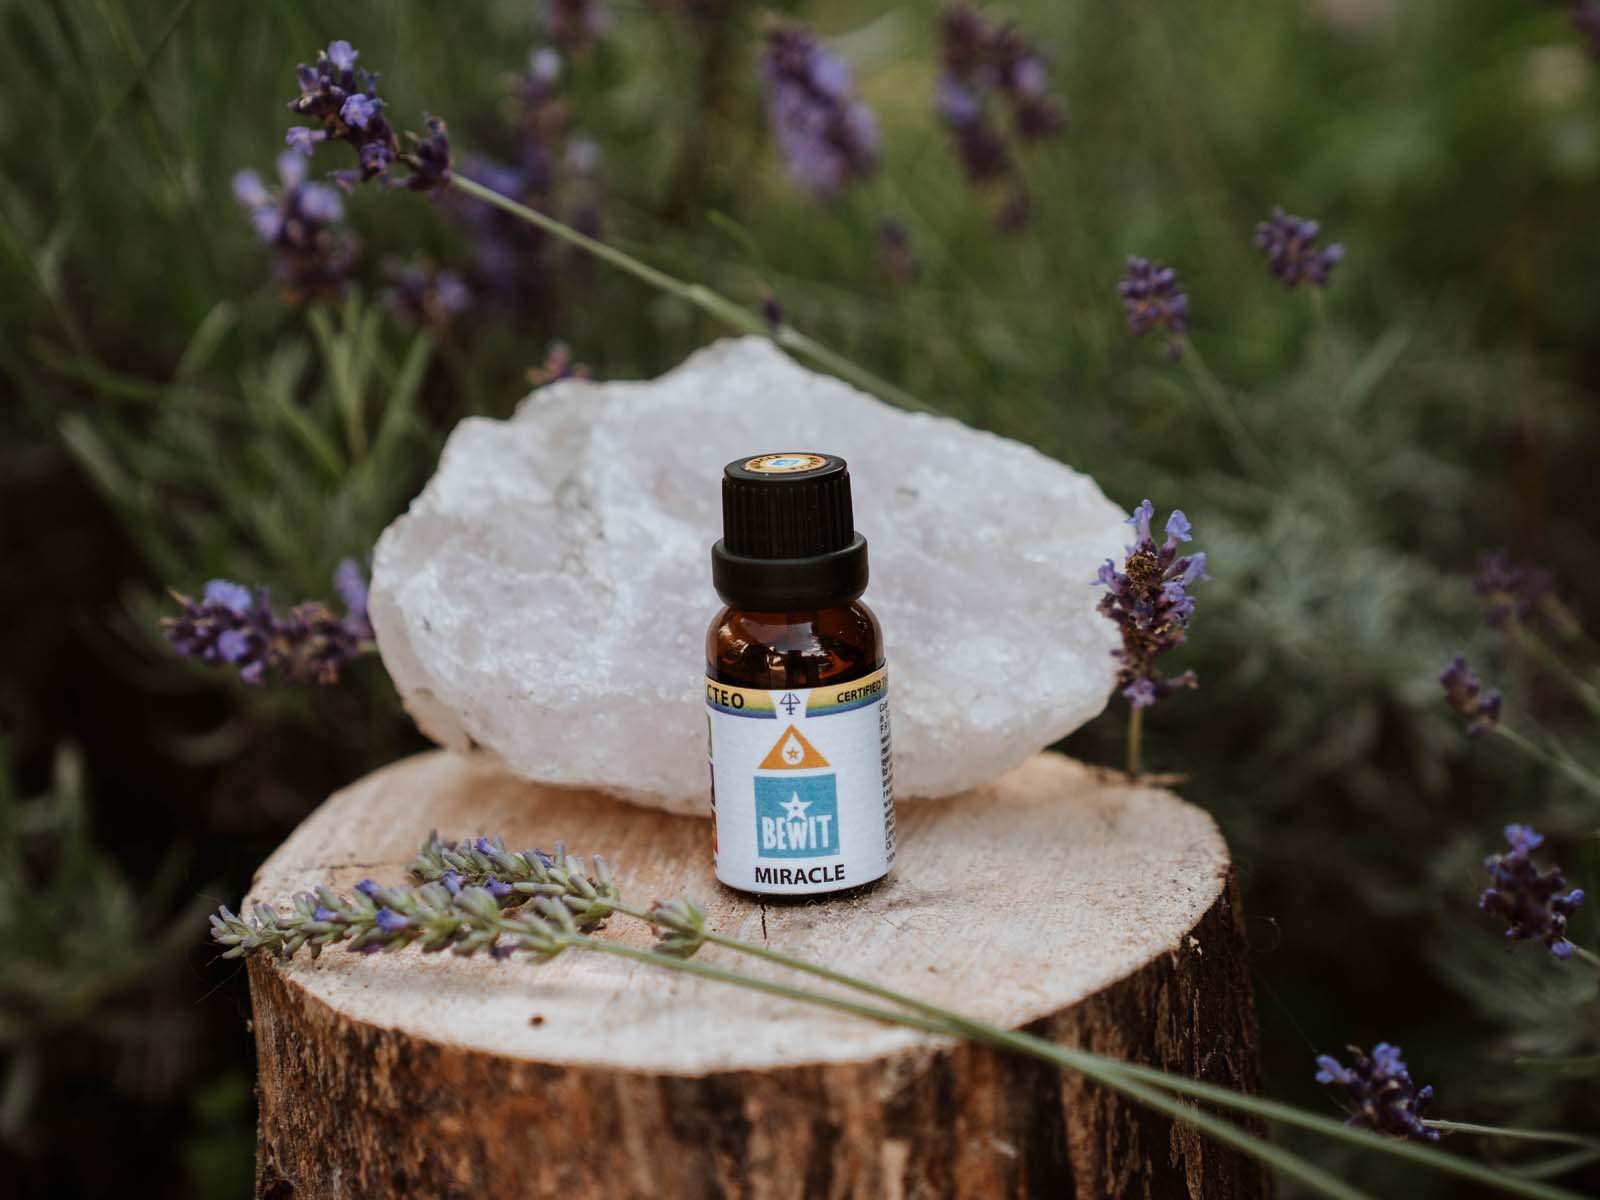 BEWIT MIRACLE - A unique blend of the essential oils - 7